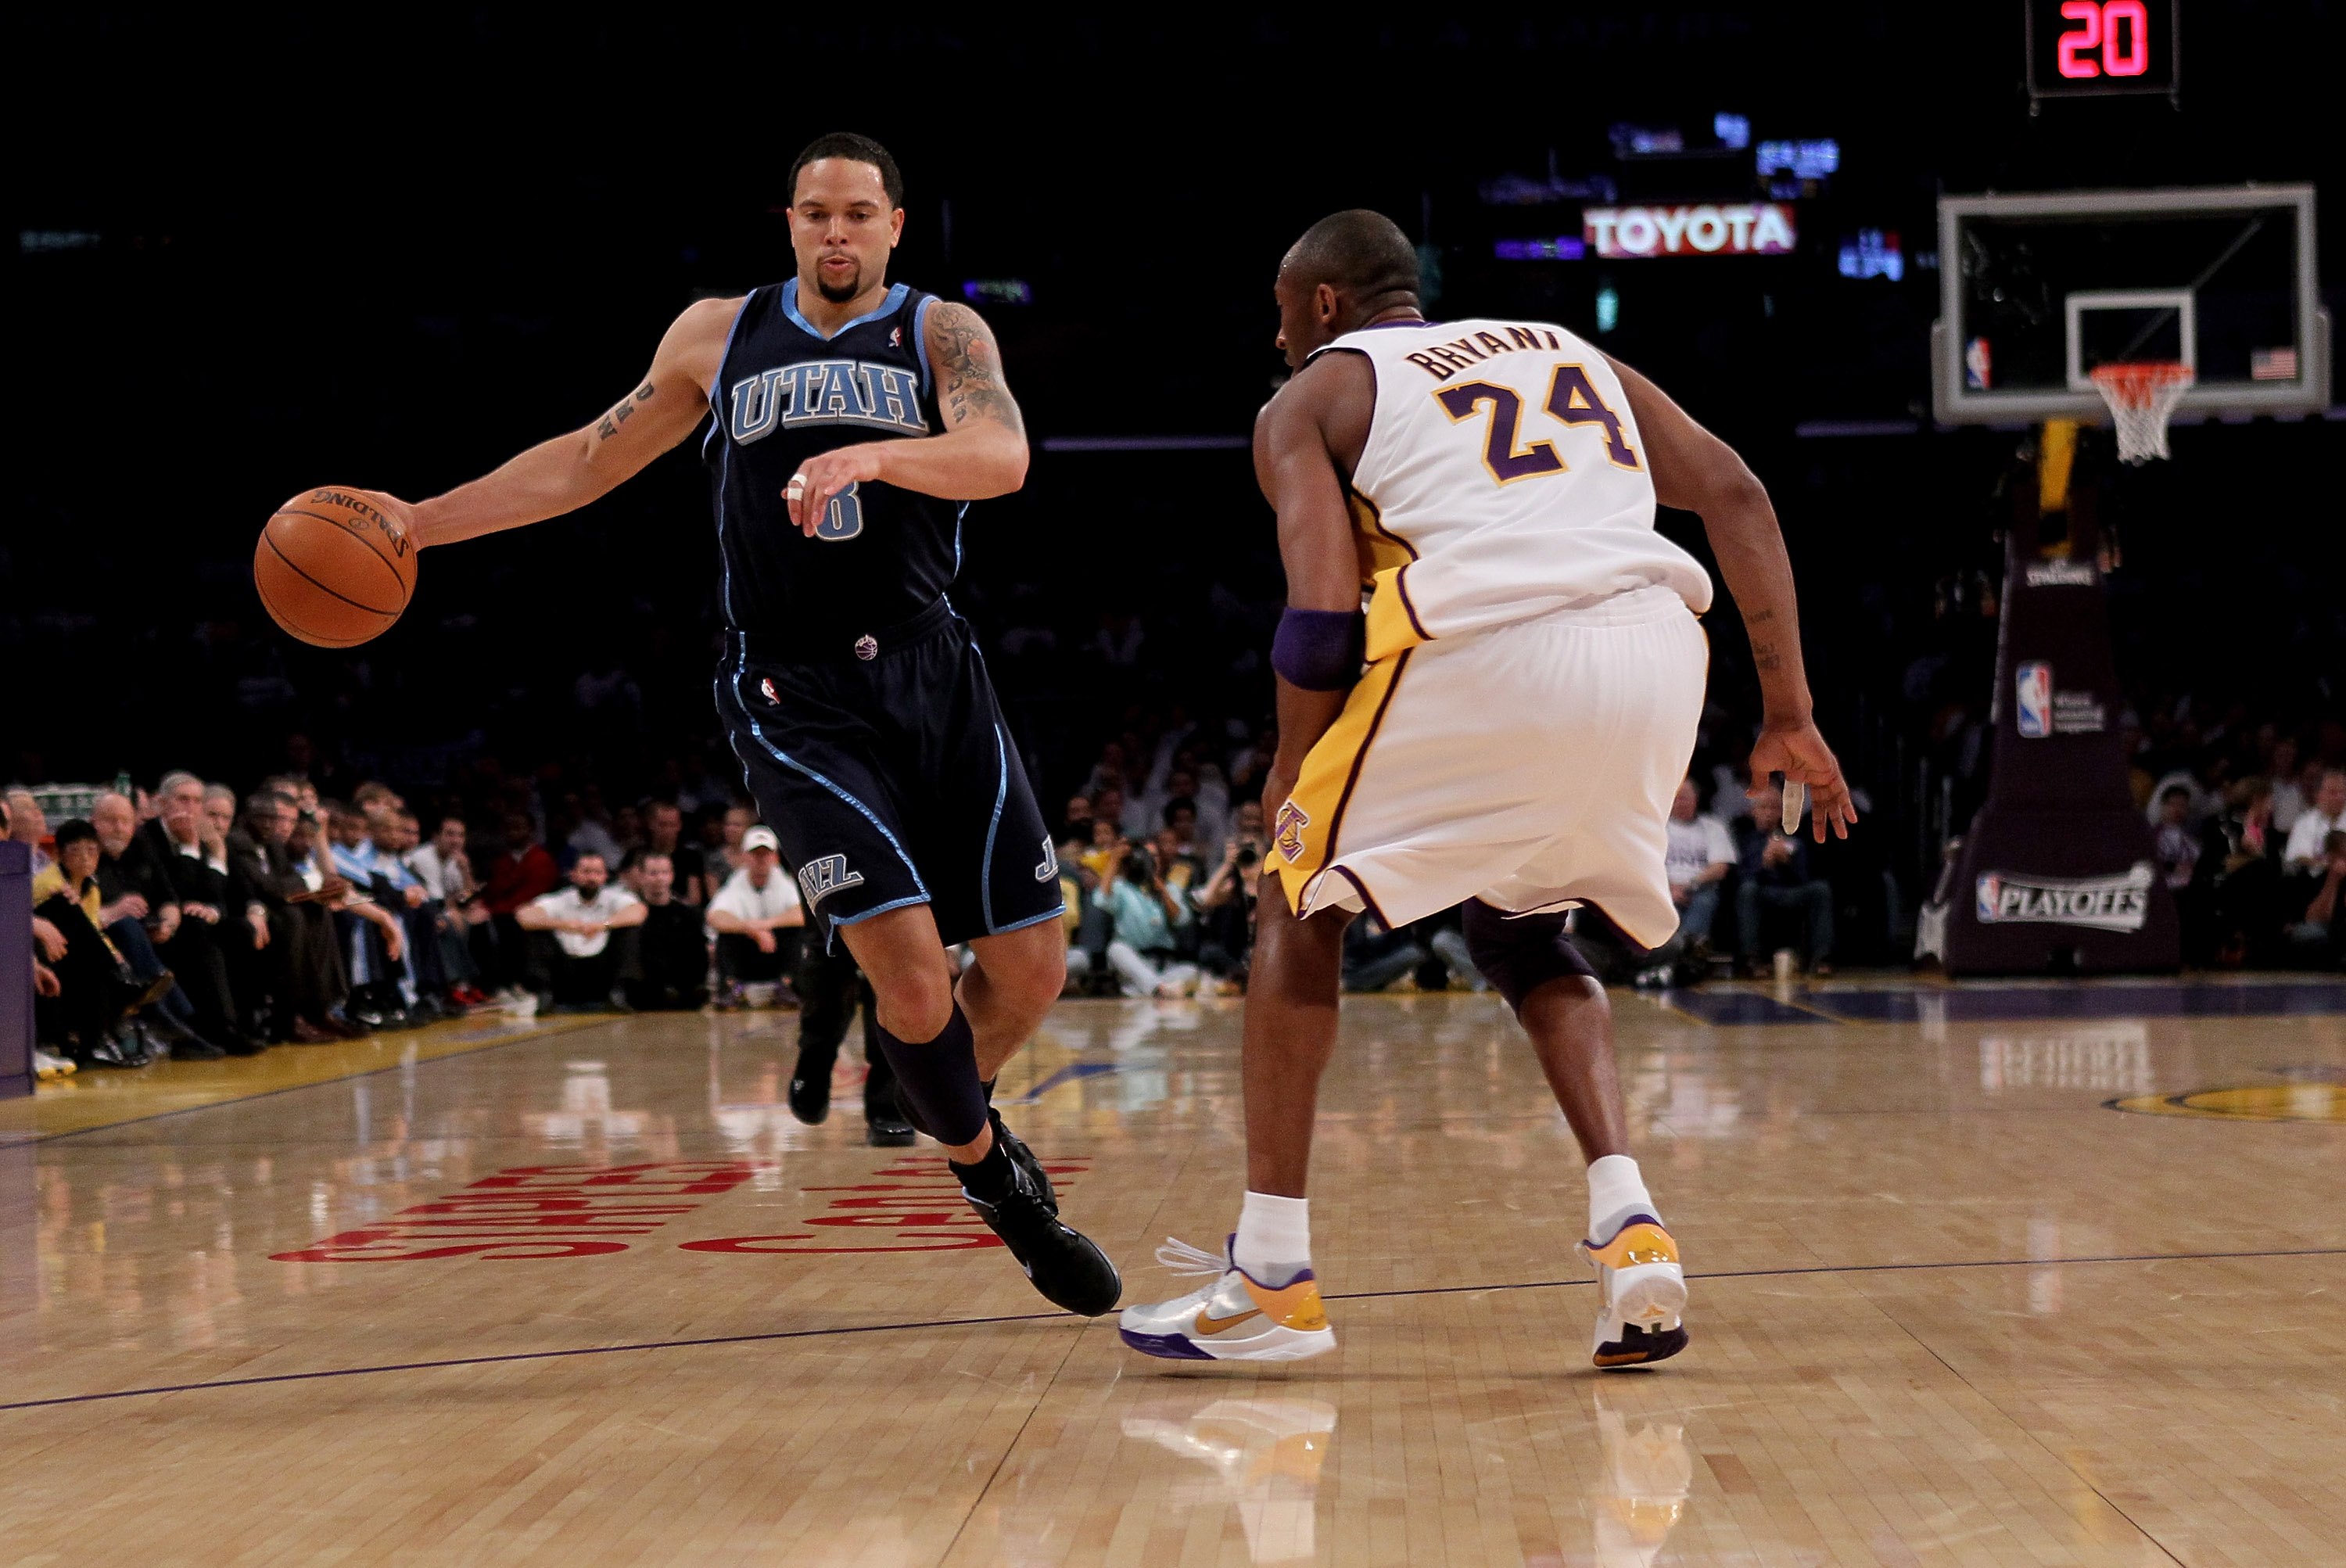 Deron Williams has one of the most prolific crossover dribble moves in the league.